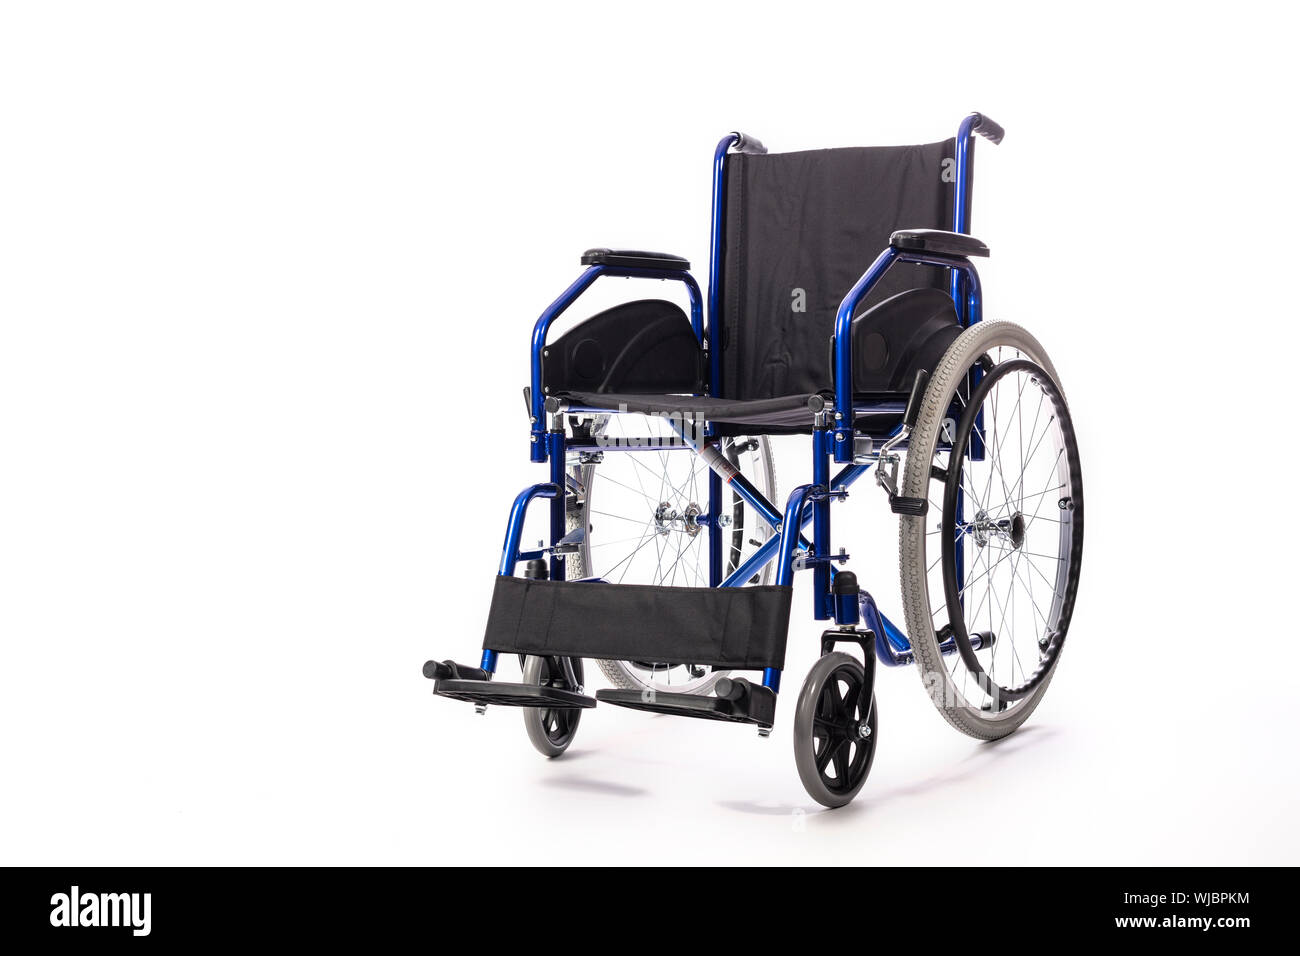 wheelchair for the disabled on a white background, nobodyin the image. Stock Photo